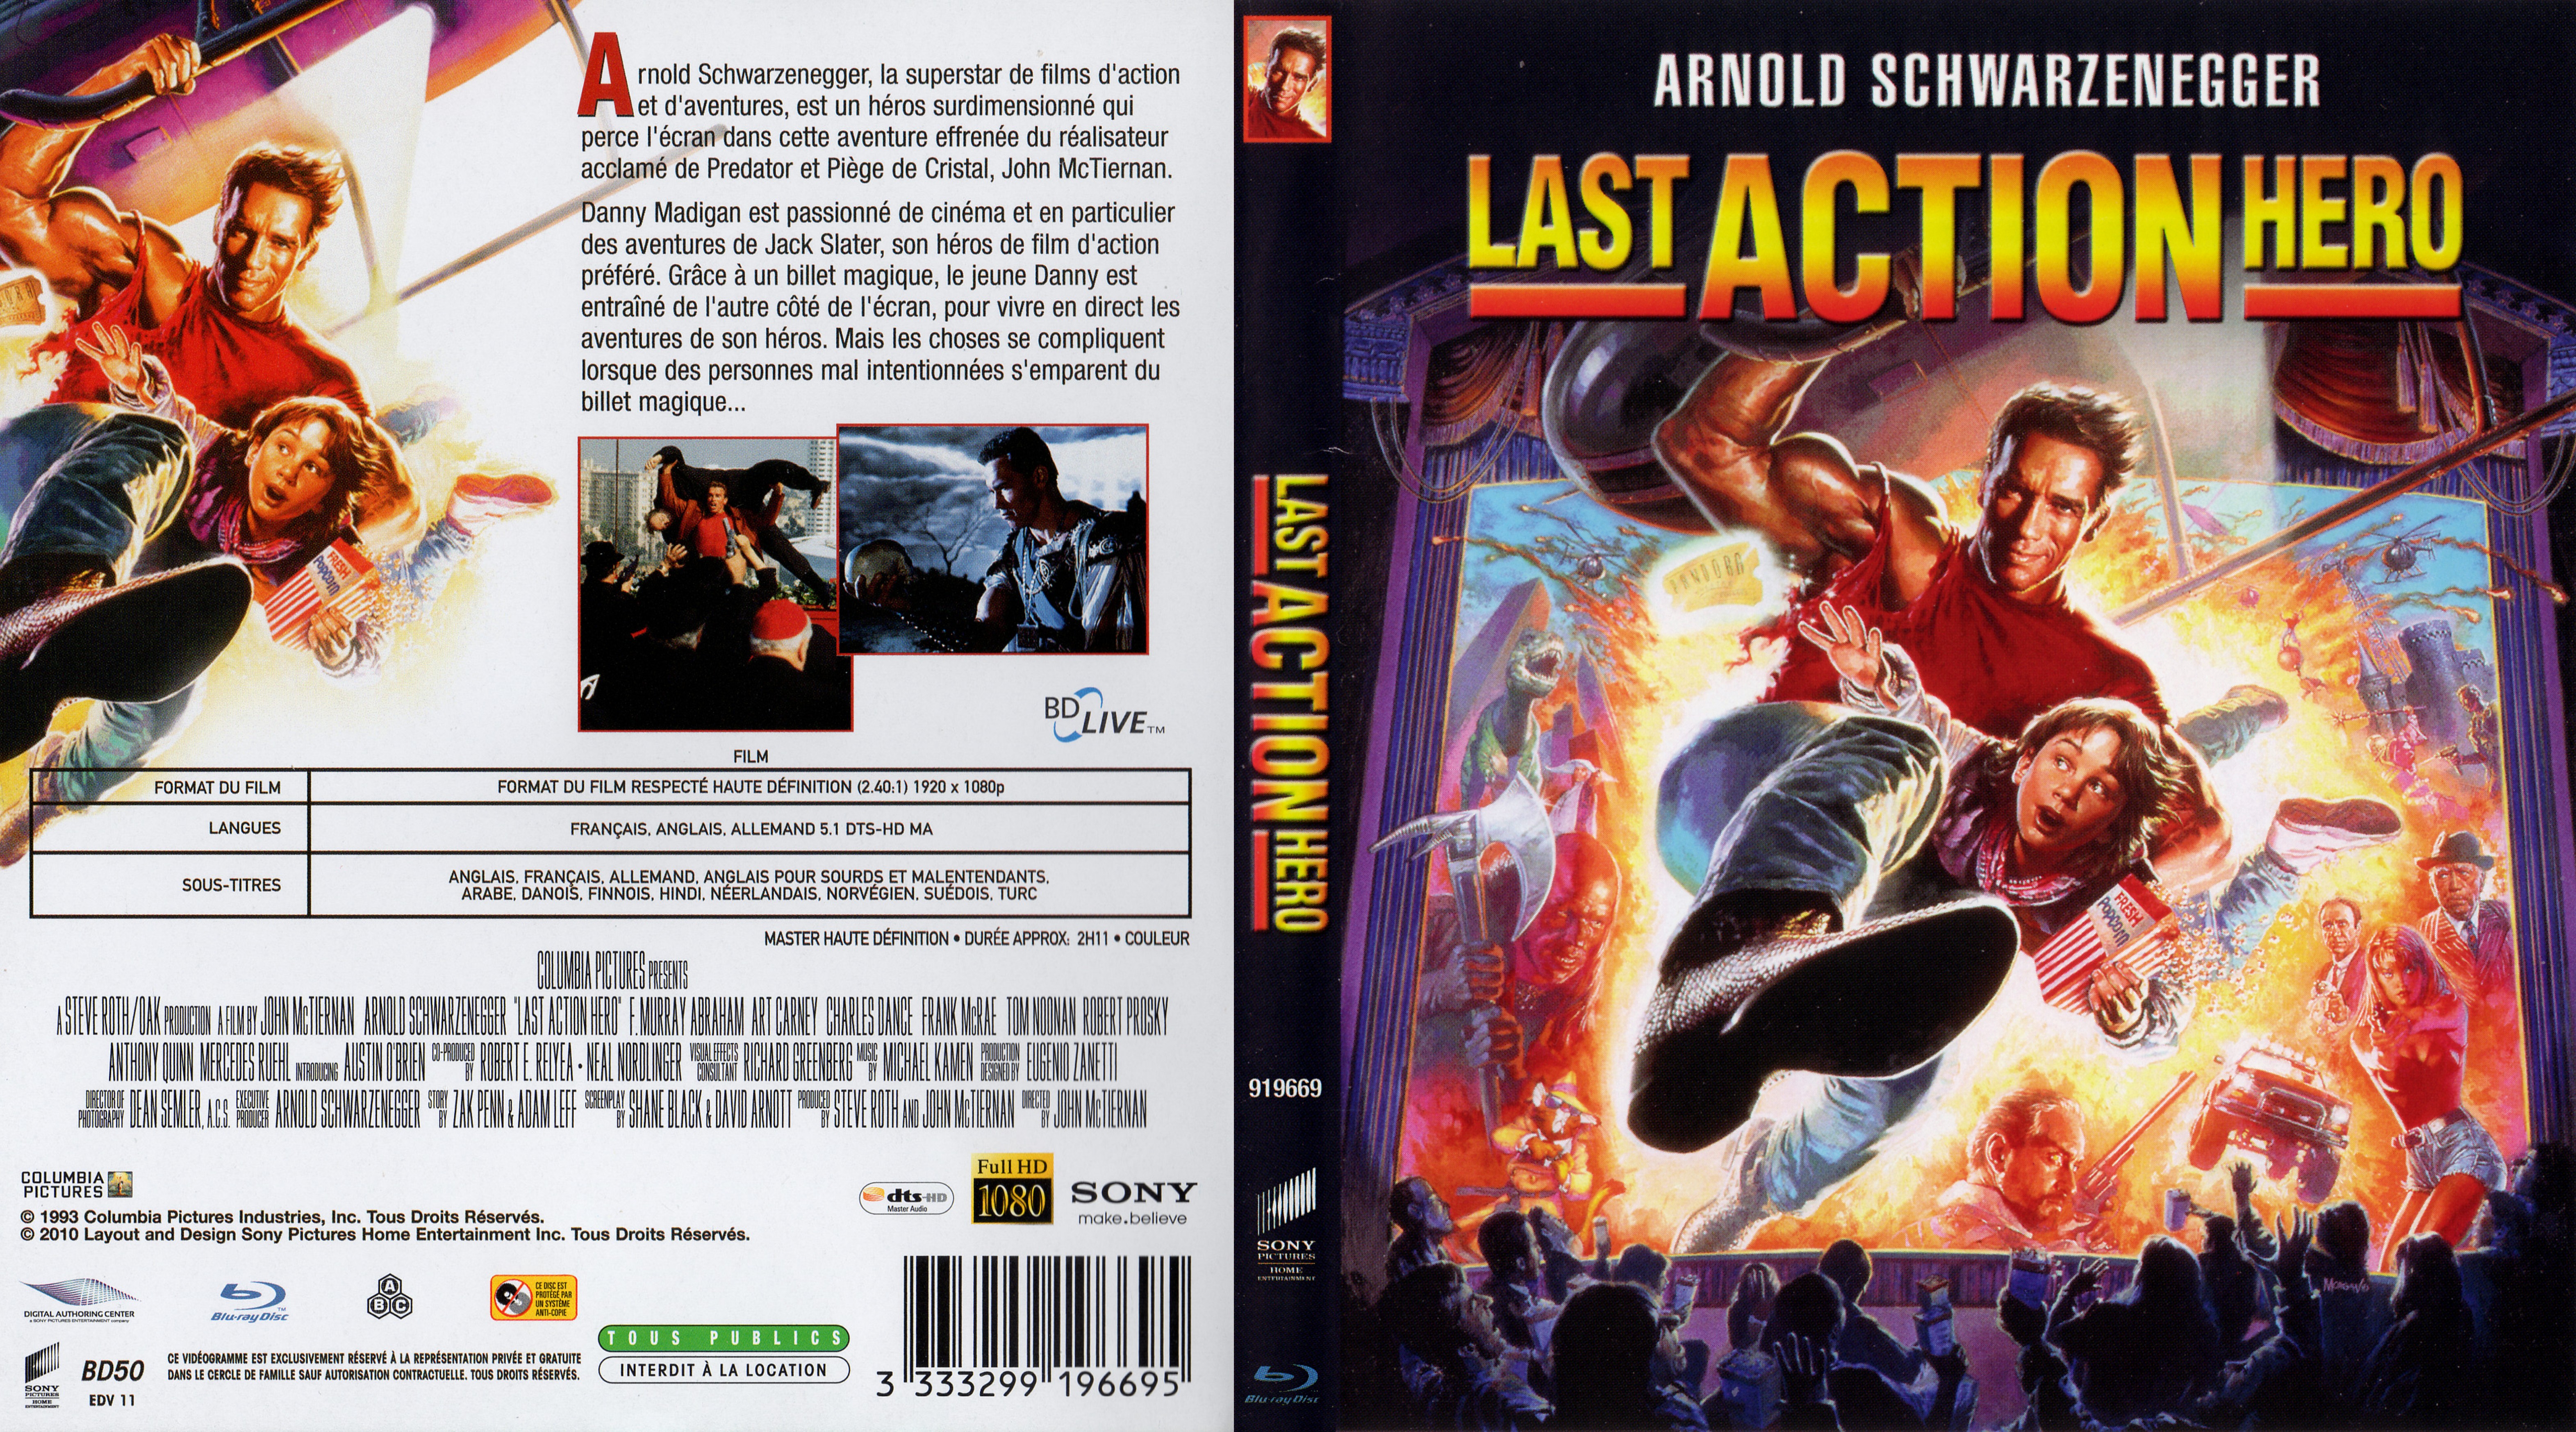 Jaquette DVD Last action hero (BLU-RAY) v2